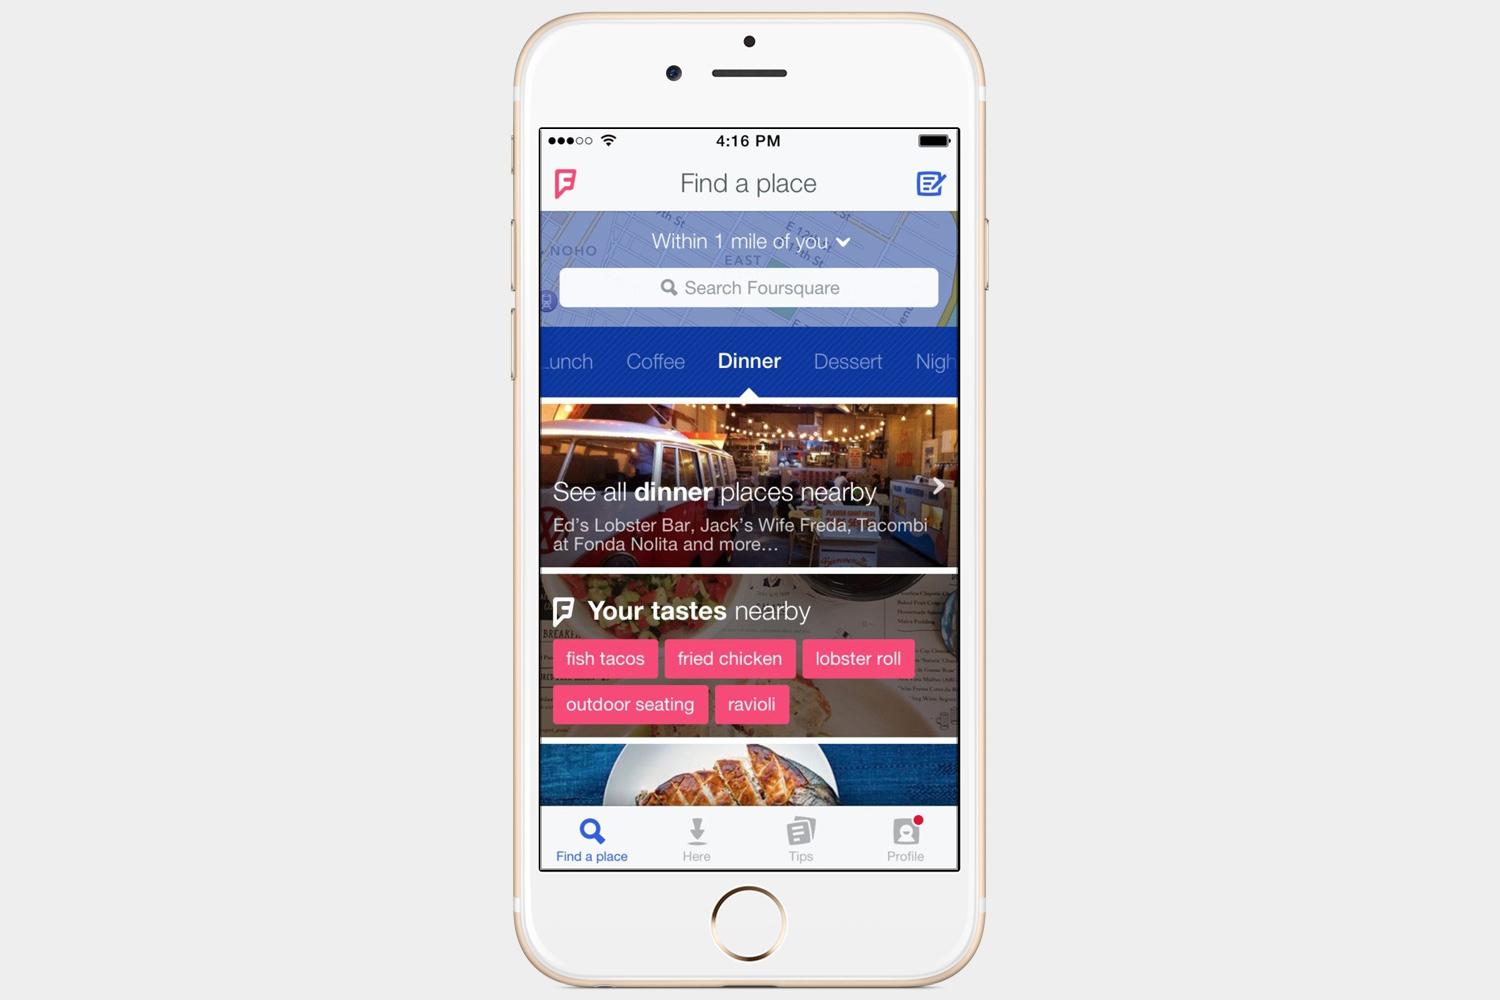 Best Fourth of July Apps - Foursquare